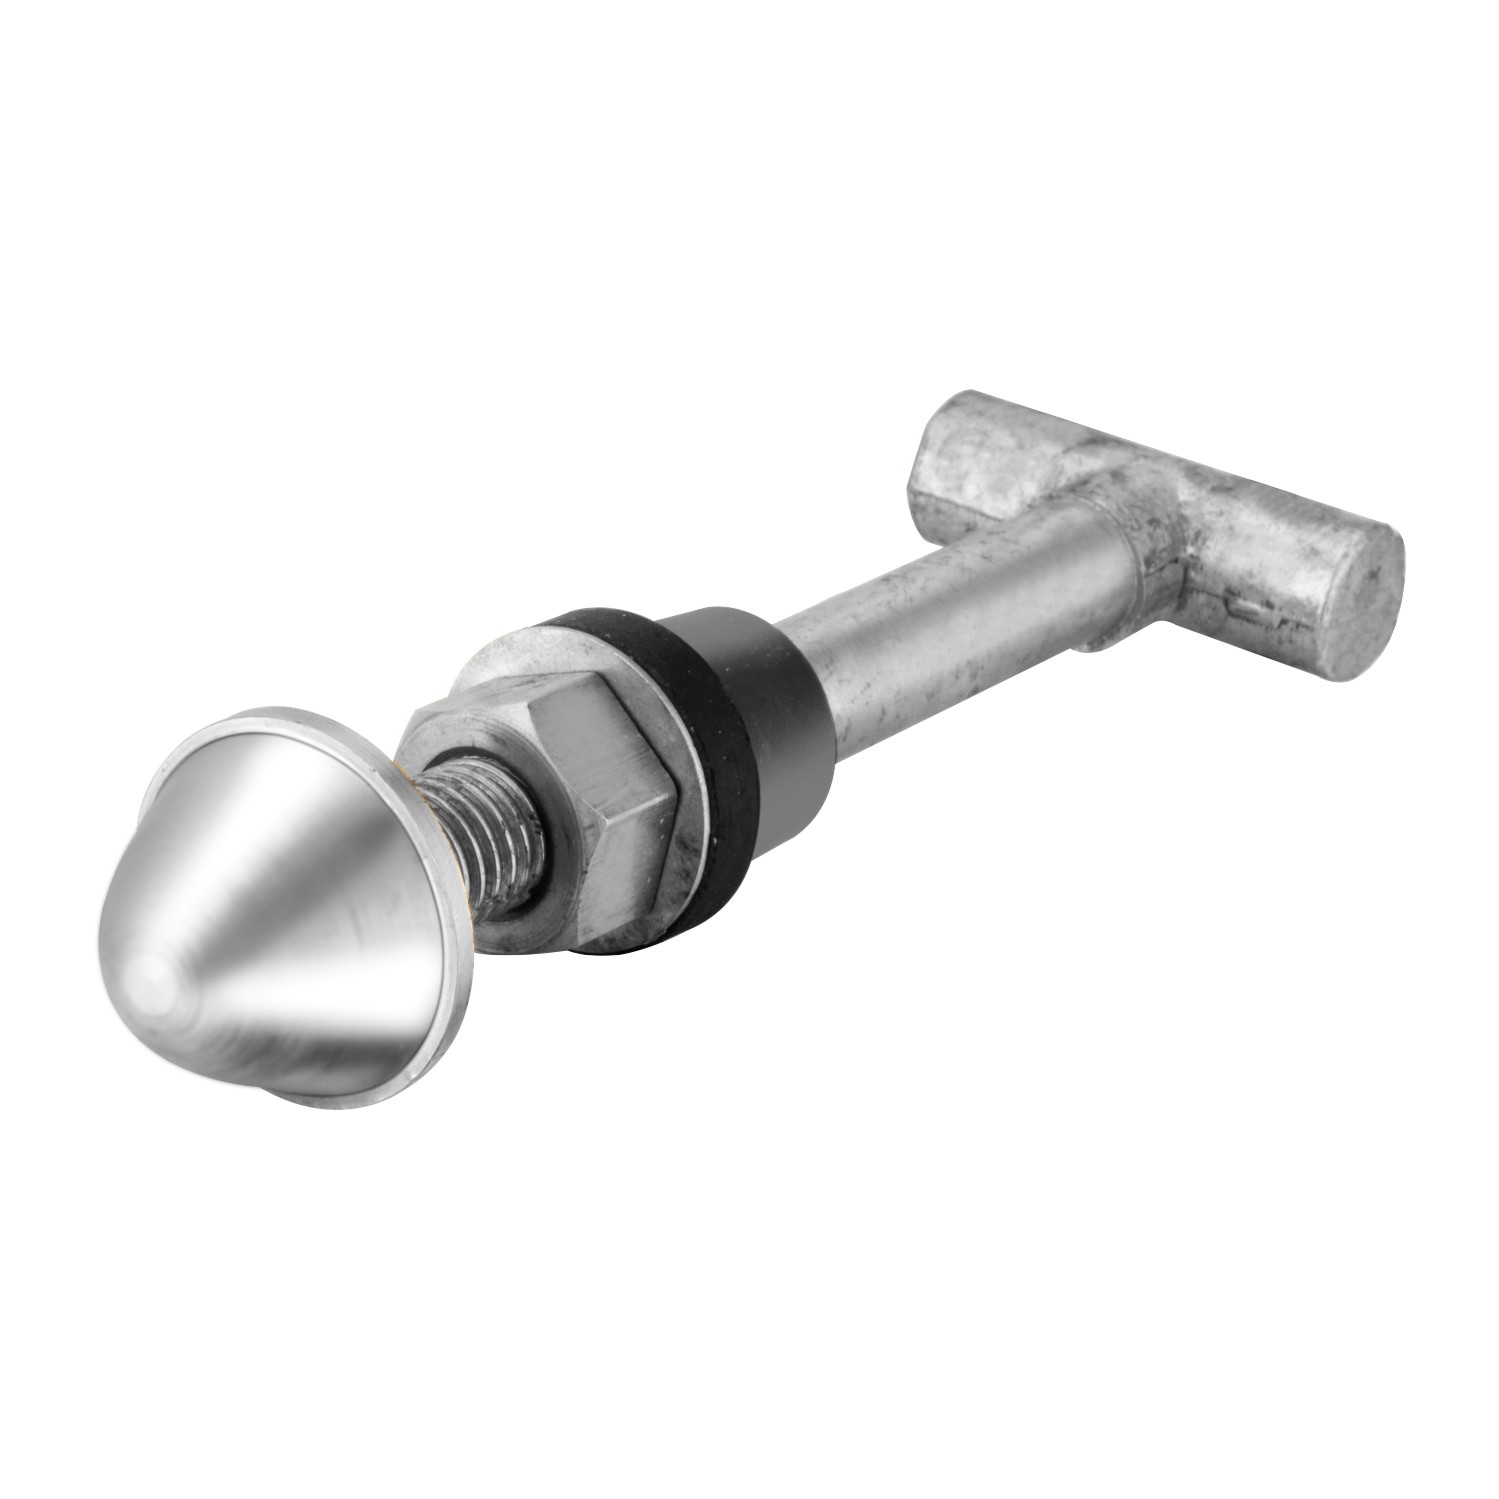 T-Type SS Rack Bolt with Metal Cap